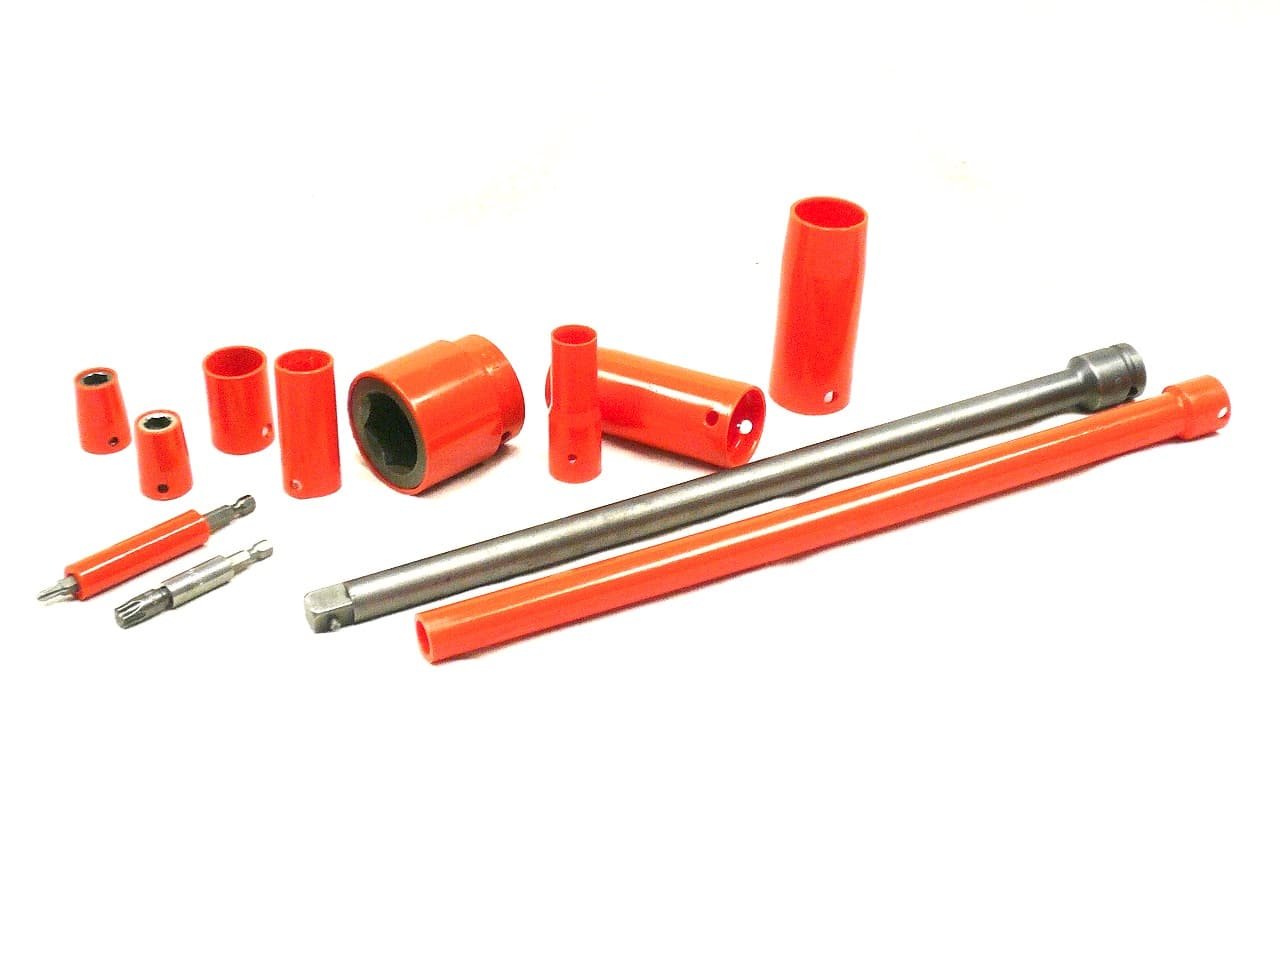 Various polyurethane covers for sockets and socket arm extensions. 